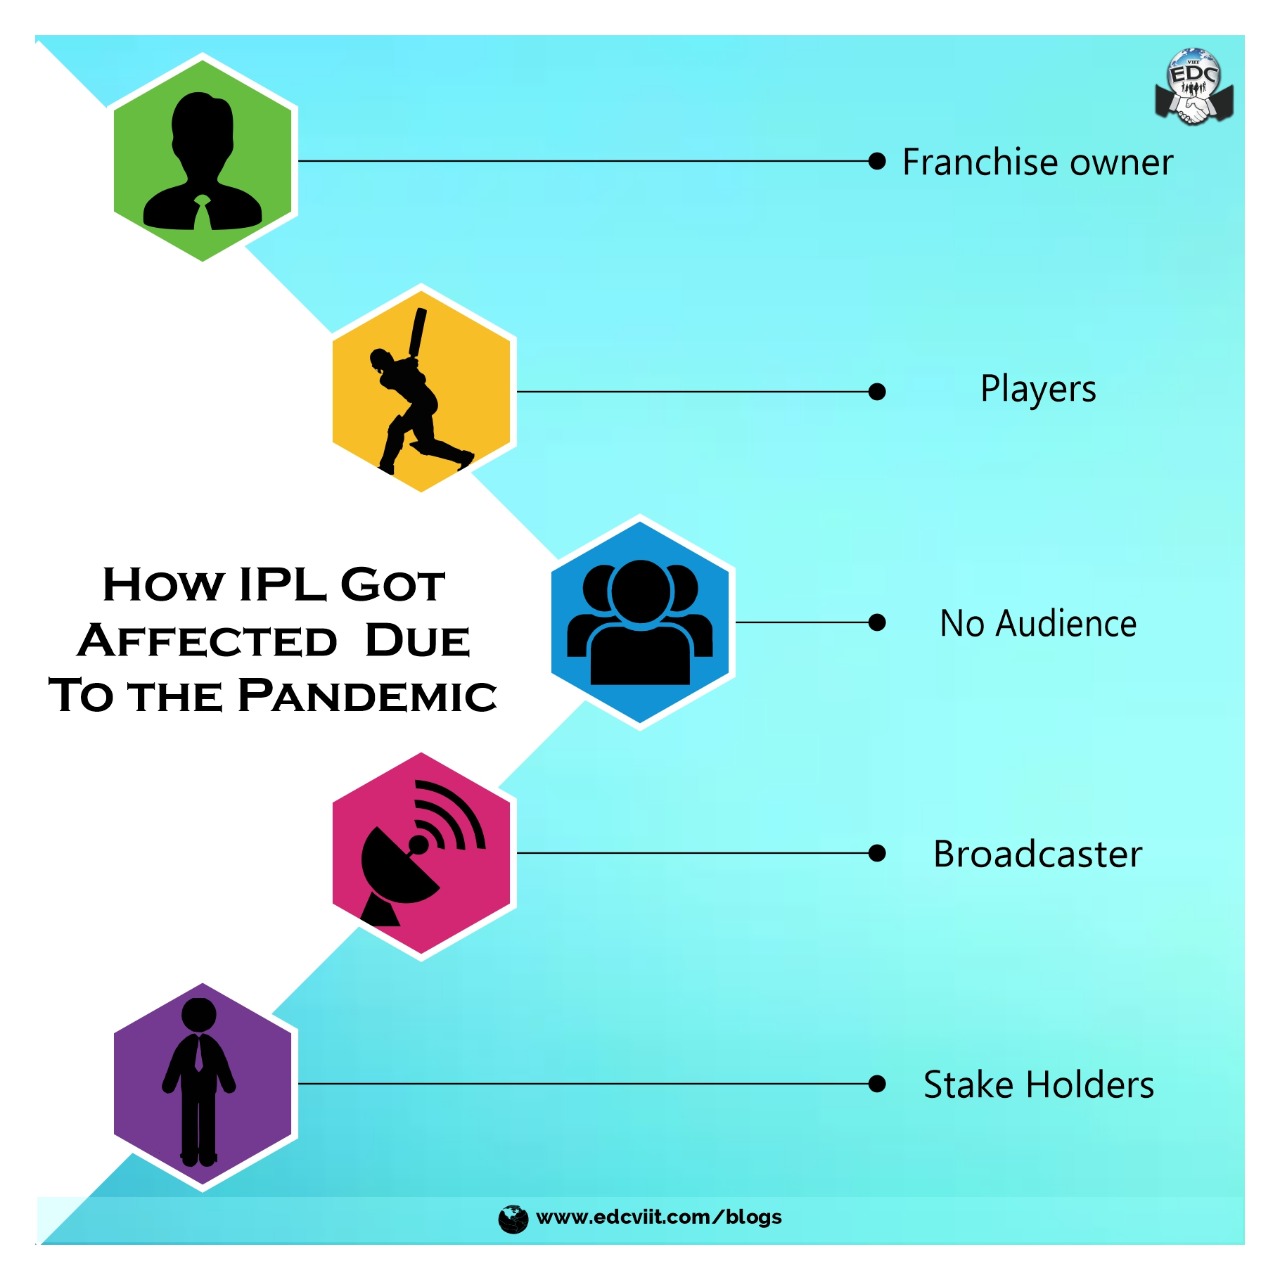 HOW IPL GOT AFFECTED DUE TO THE PANDEMIC